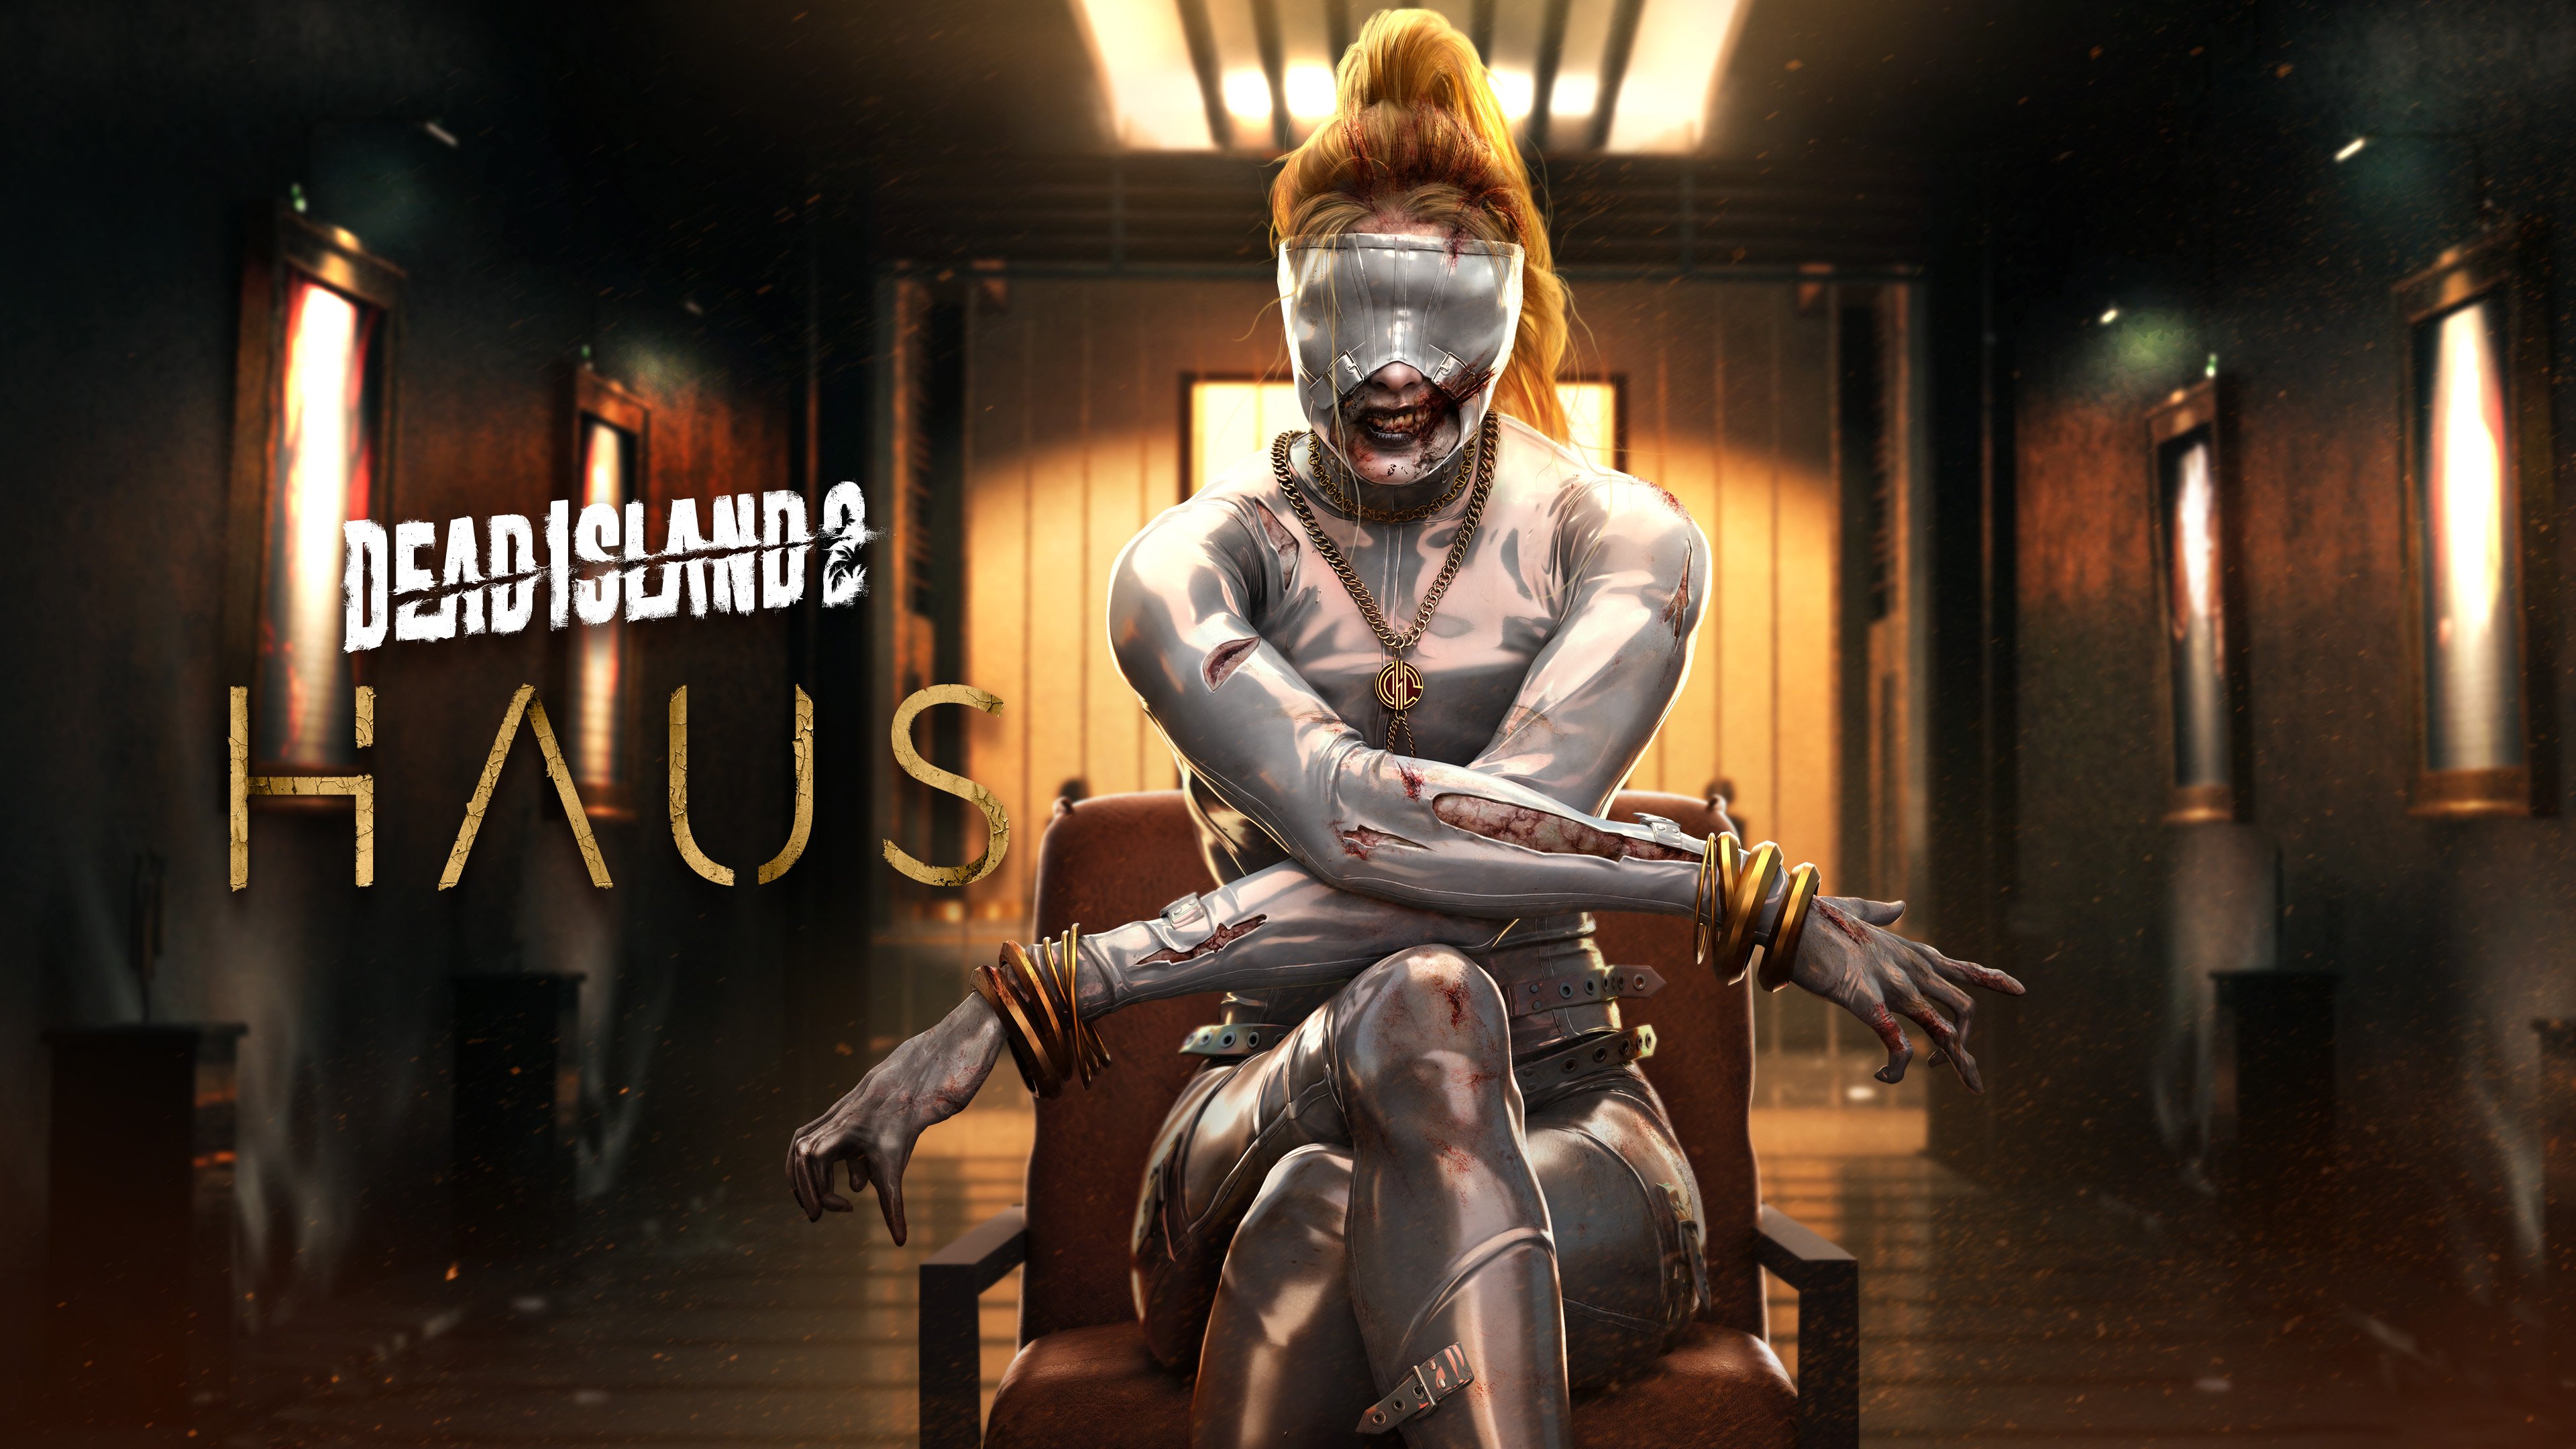 #
      Dead Island 2 story expansion ‘Haus’ launches November 2